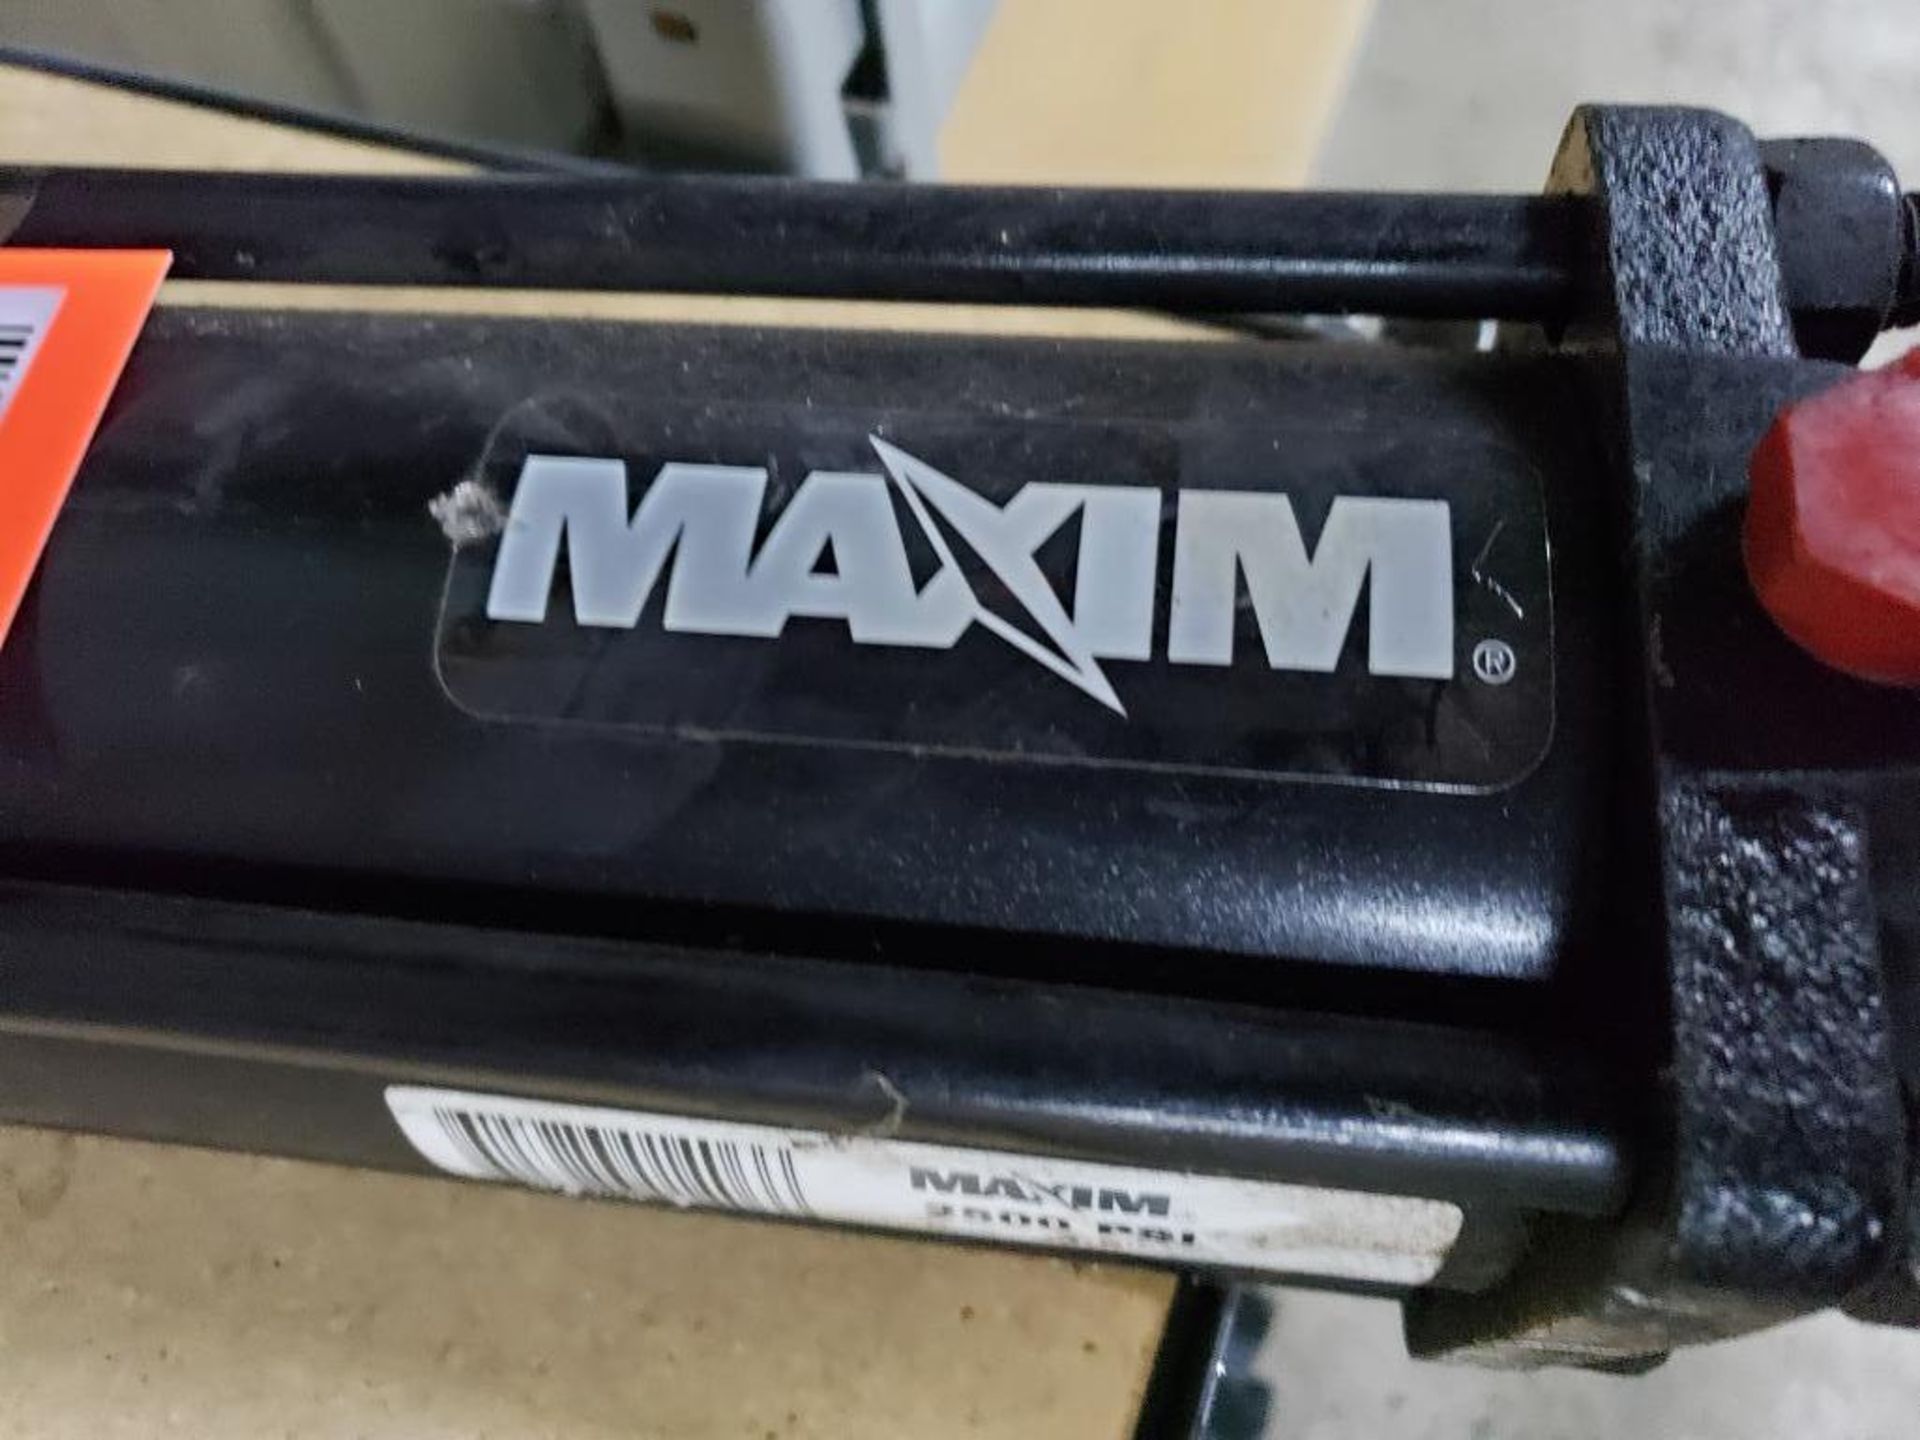 Maxin 2500psi hydraulic cylinder. 3.5" bore, 20" stroke, 1.25" rod diameter. New old stock. - Image 2 of 7